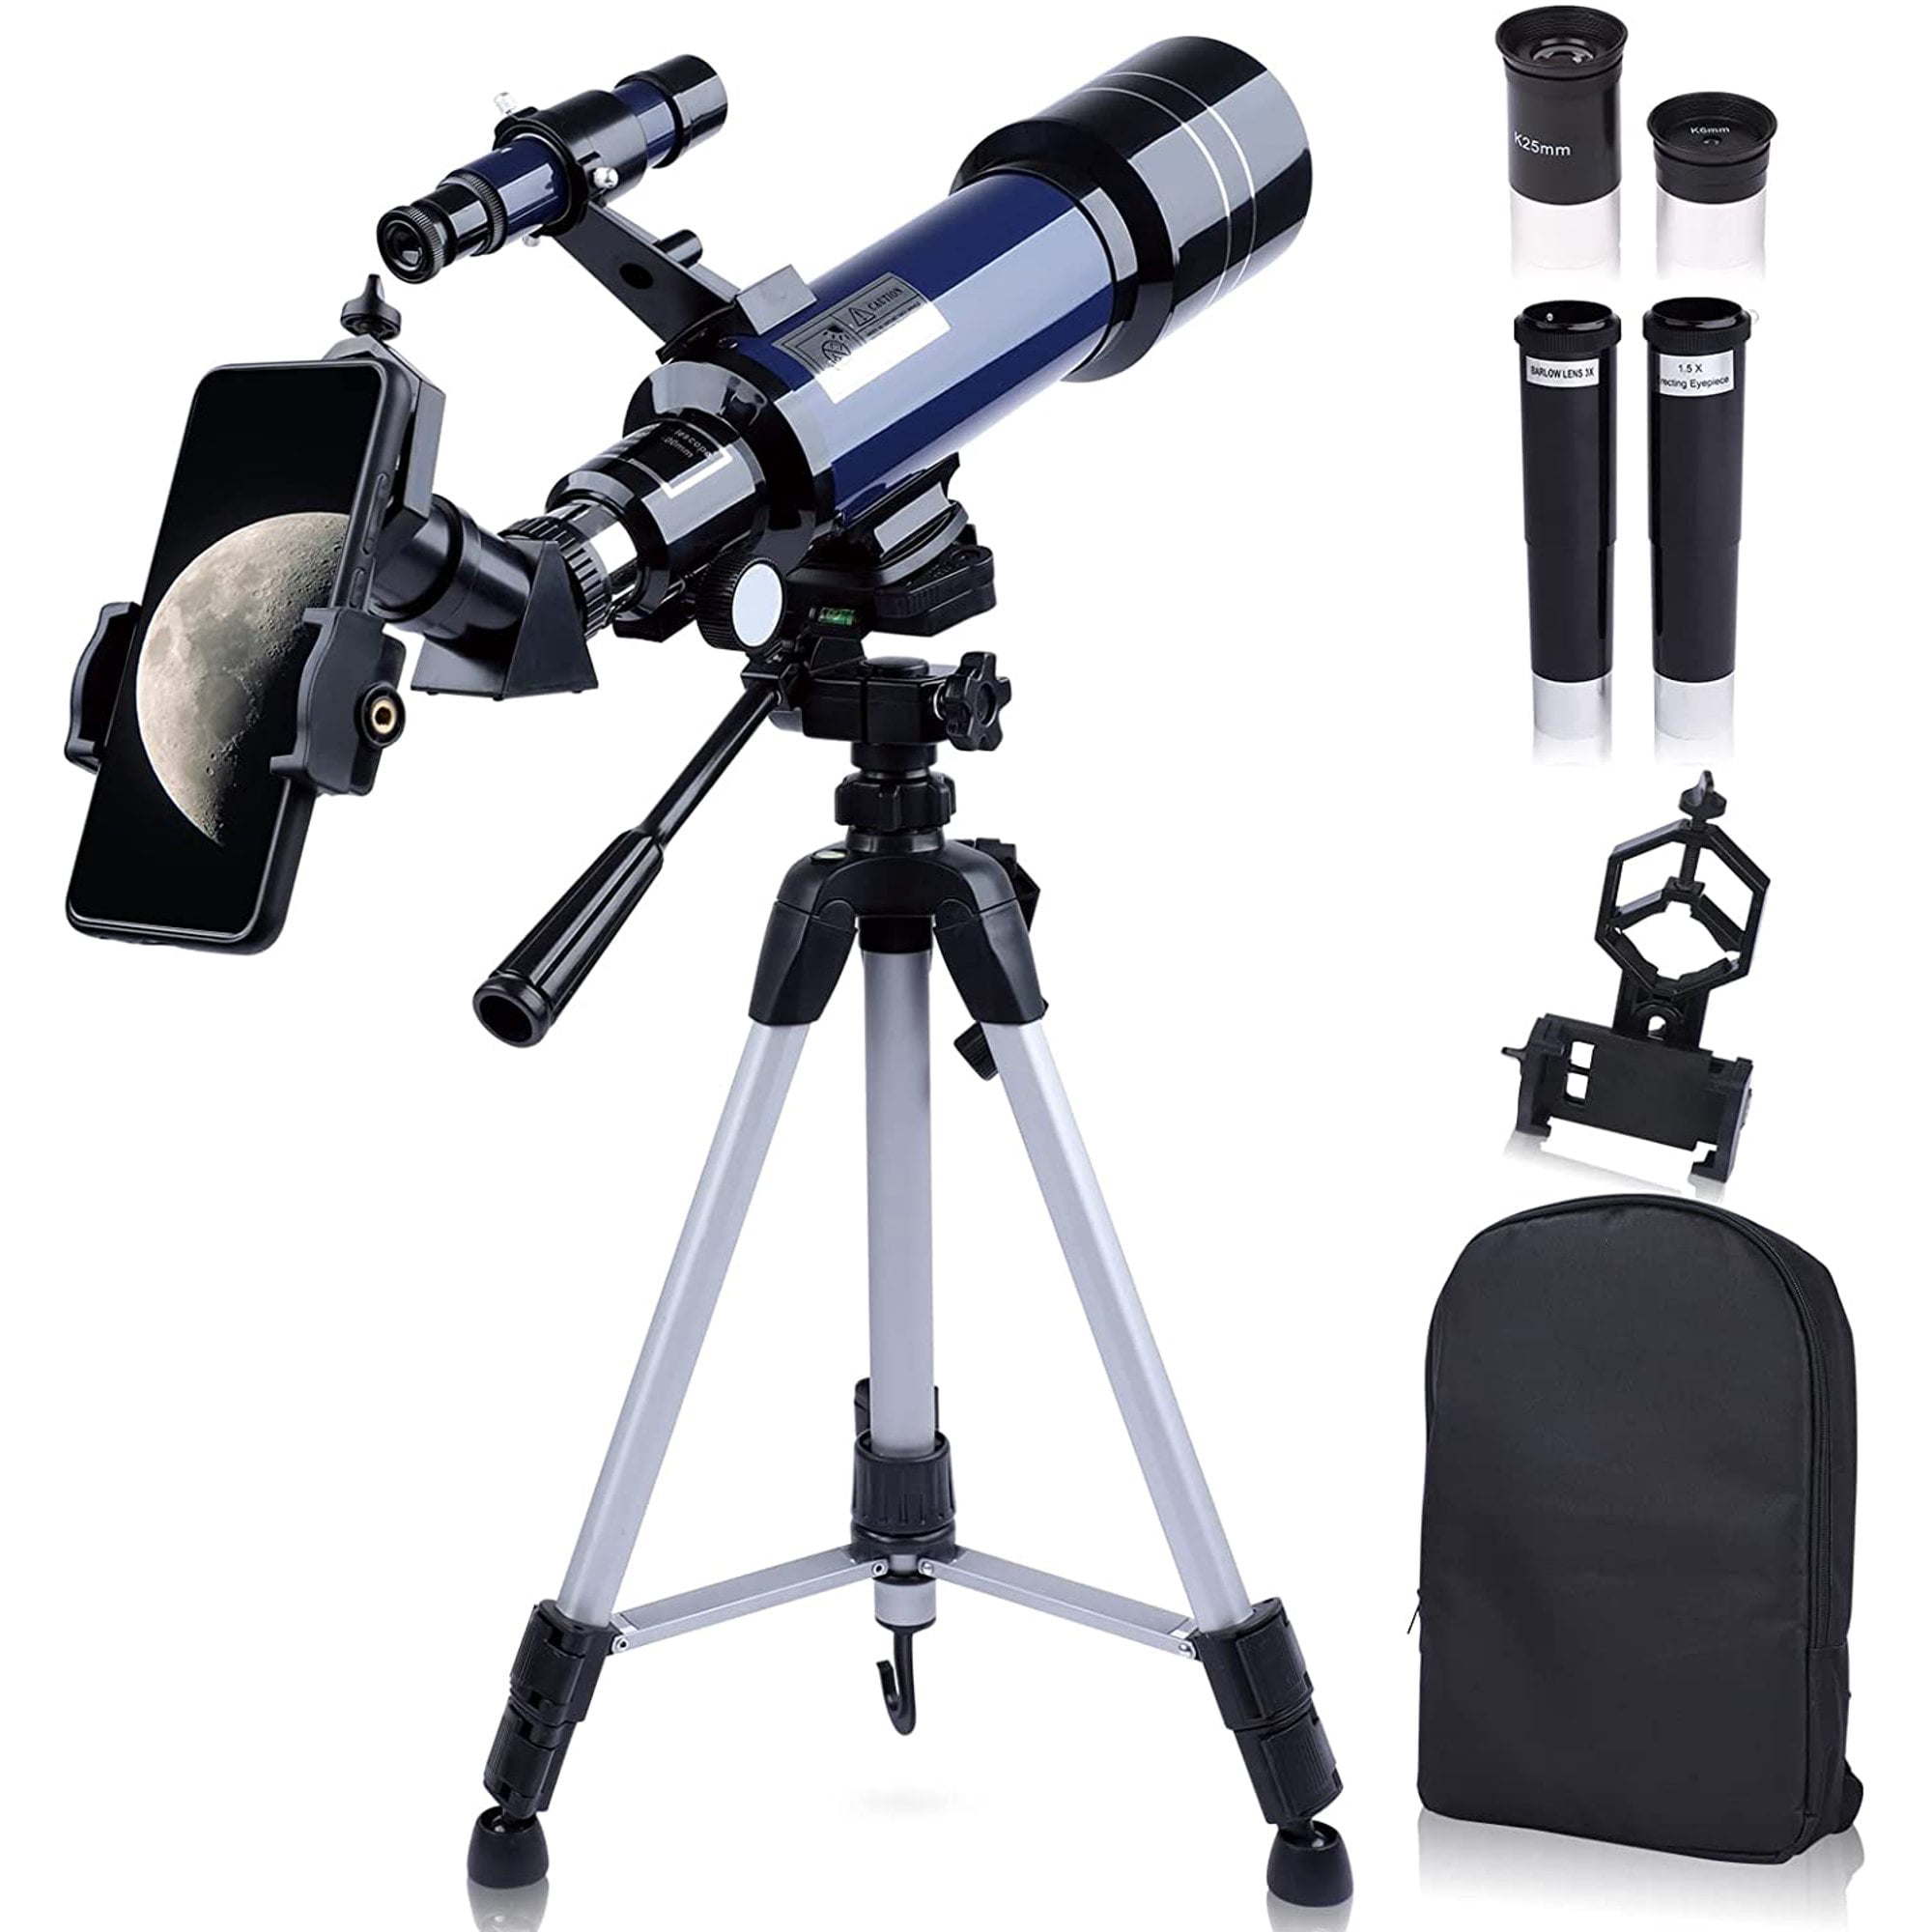 70/400mm Refractor Telescope for Beginners (Adults & Kids) with Tripod, Carrying Bag, & Phone Adapter